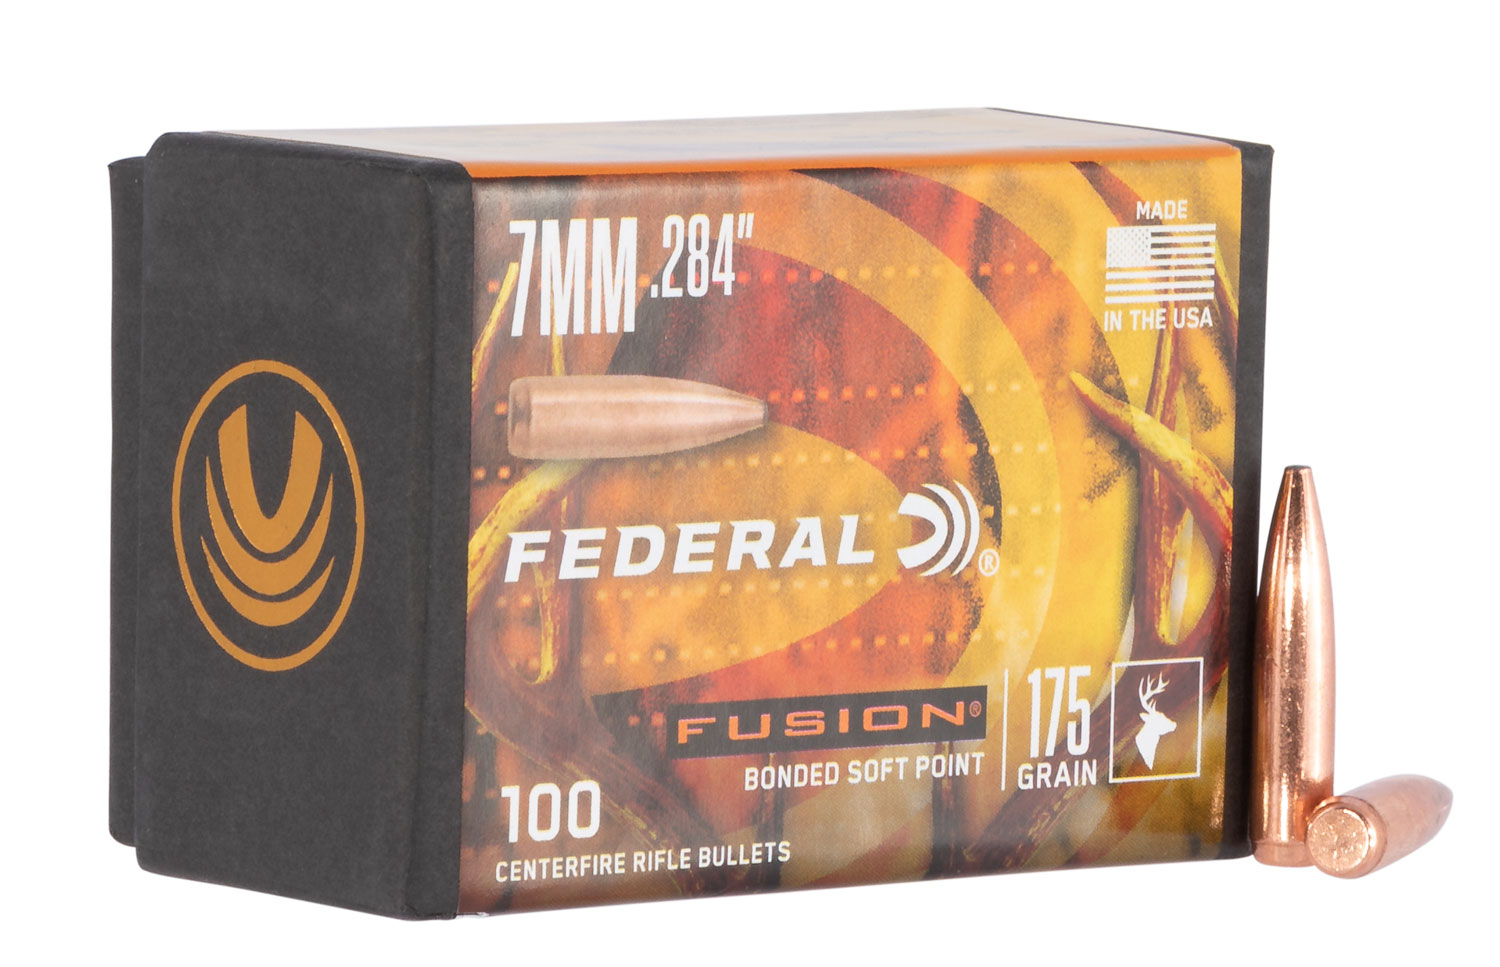 Federal Premium FB284F4 Fusion Component 7mm .284 175 GR Fusion Soft Point ...